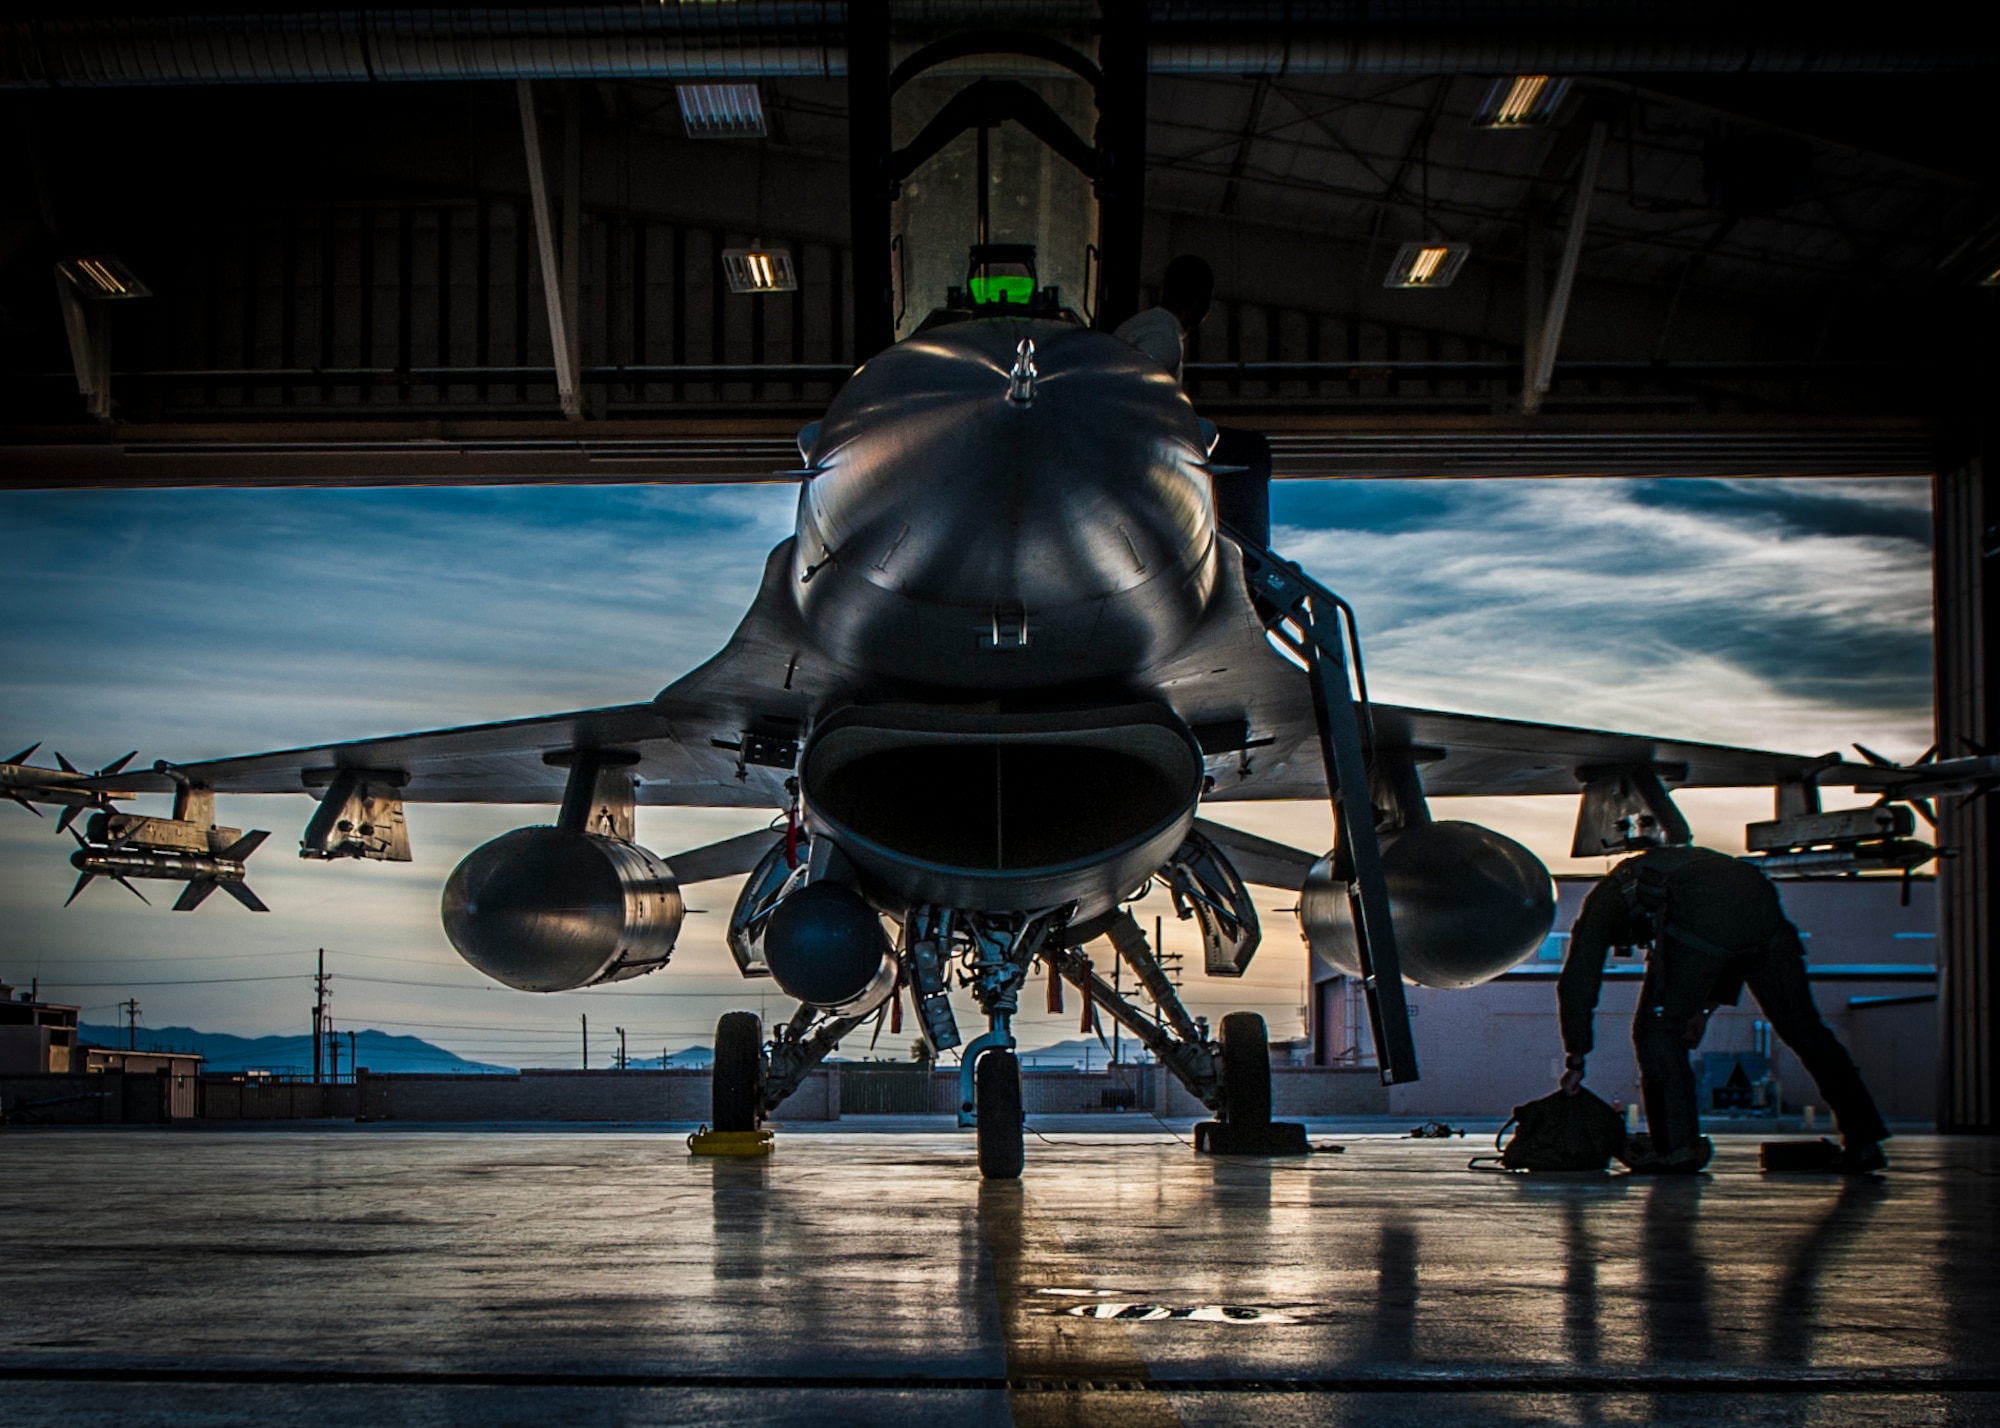 An F-16 Fighting Falcon sits in a hangar prior to departure at Holloman Air Force Base, N.M. May 13, 2015. F-16 students from the 311th Fighter Squadron, a tenant until from Luke Air Force Base, Ariz., are currently flying night operations as part of their syllabus. During the night operations, the students are becoming familiarized with night vision goggles while performing combat training missions. (U.S. Air Force photo by Airman 1st Class Emily A. Kenney/Released)